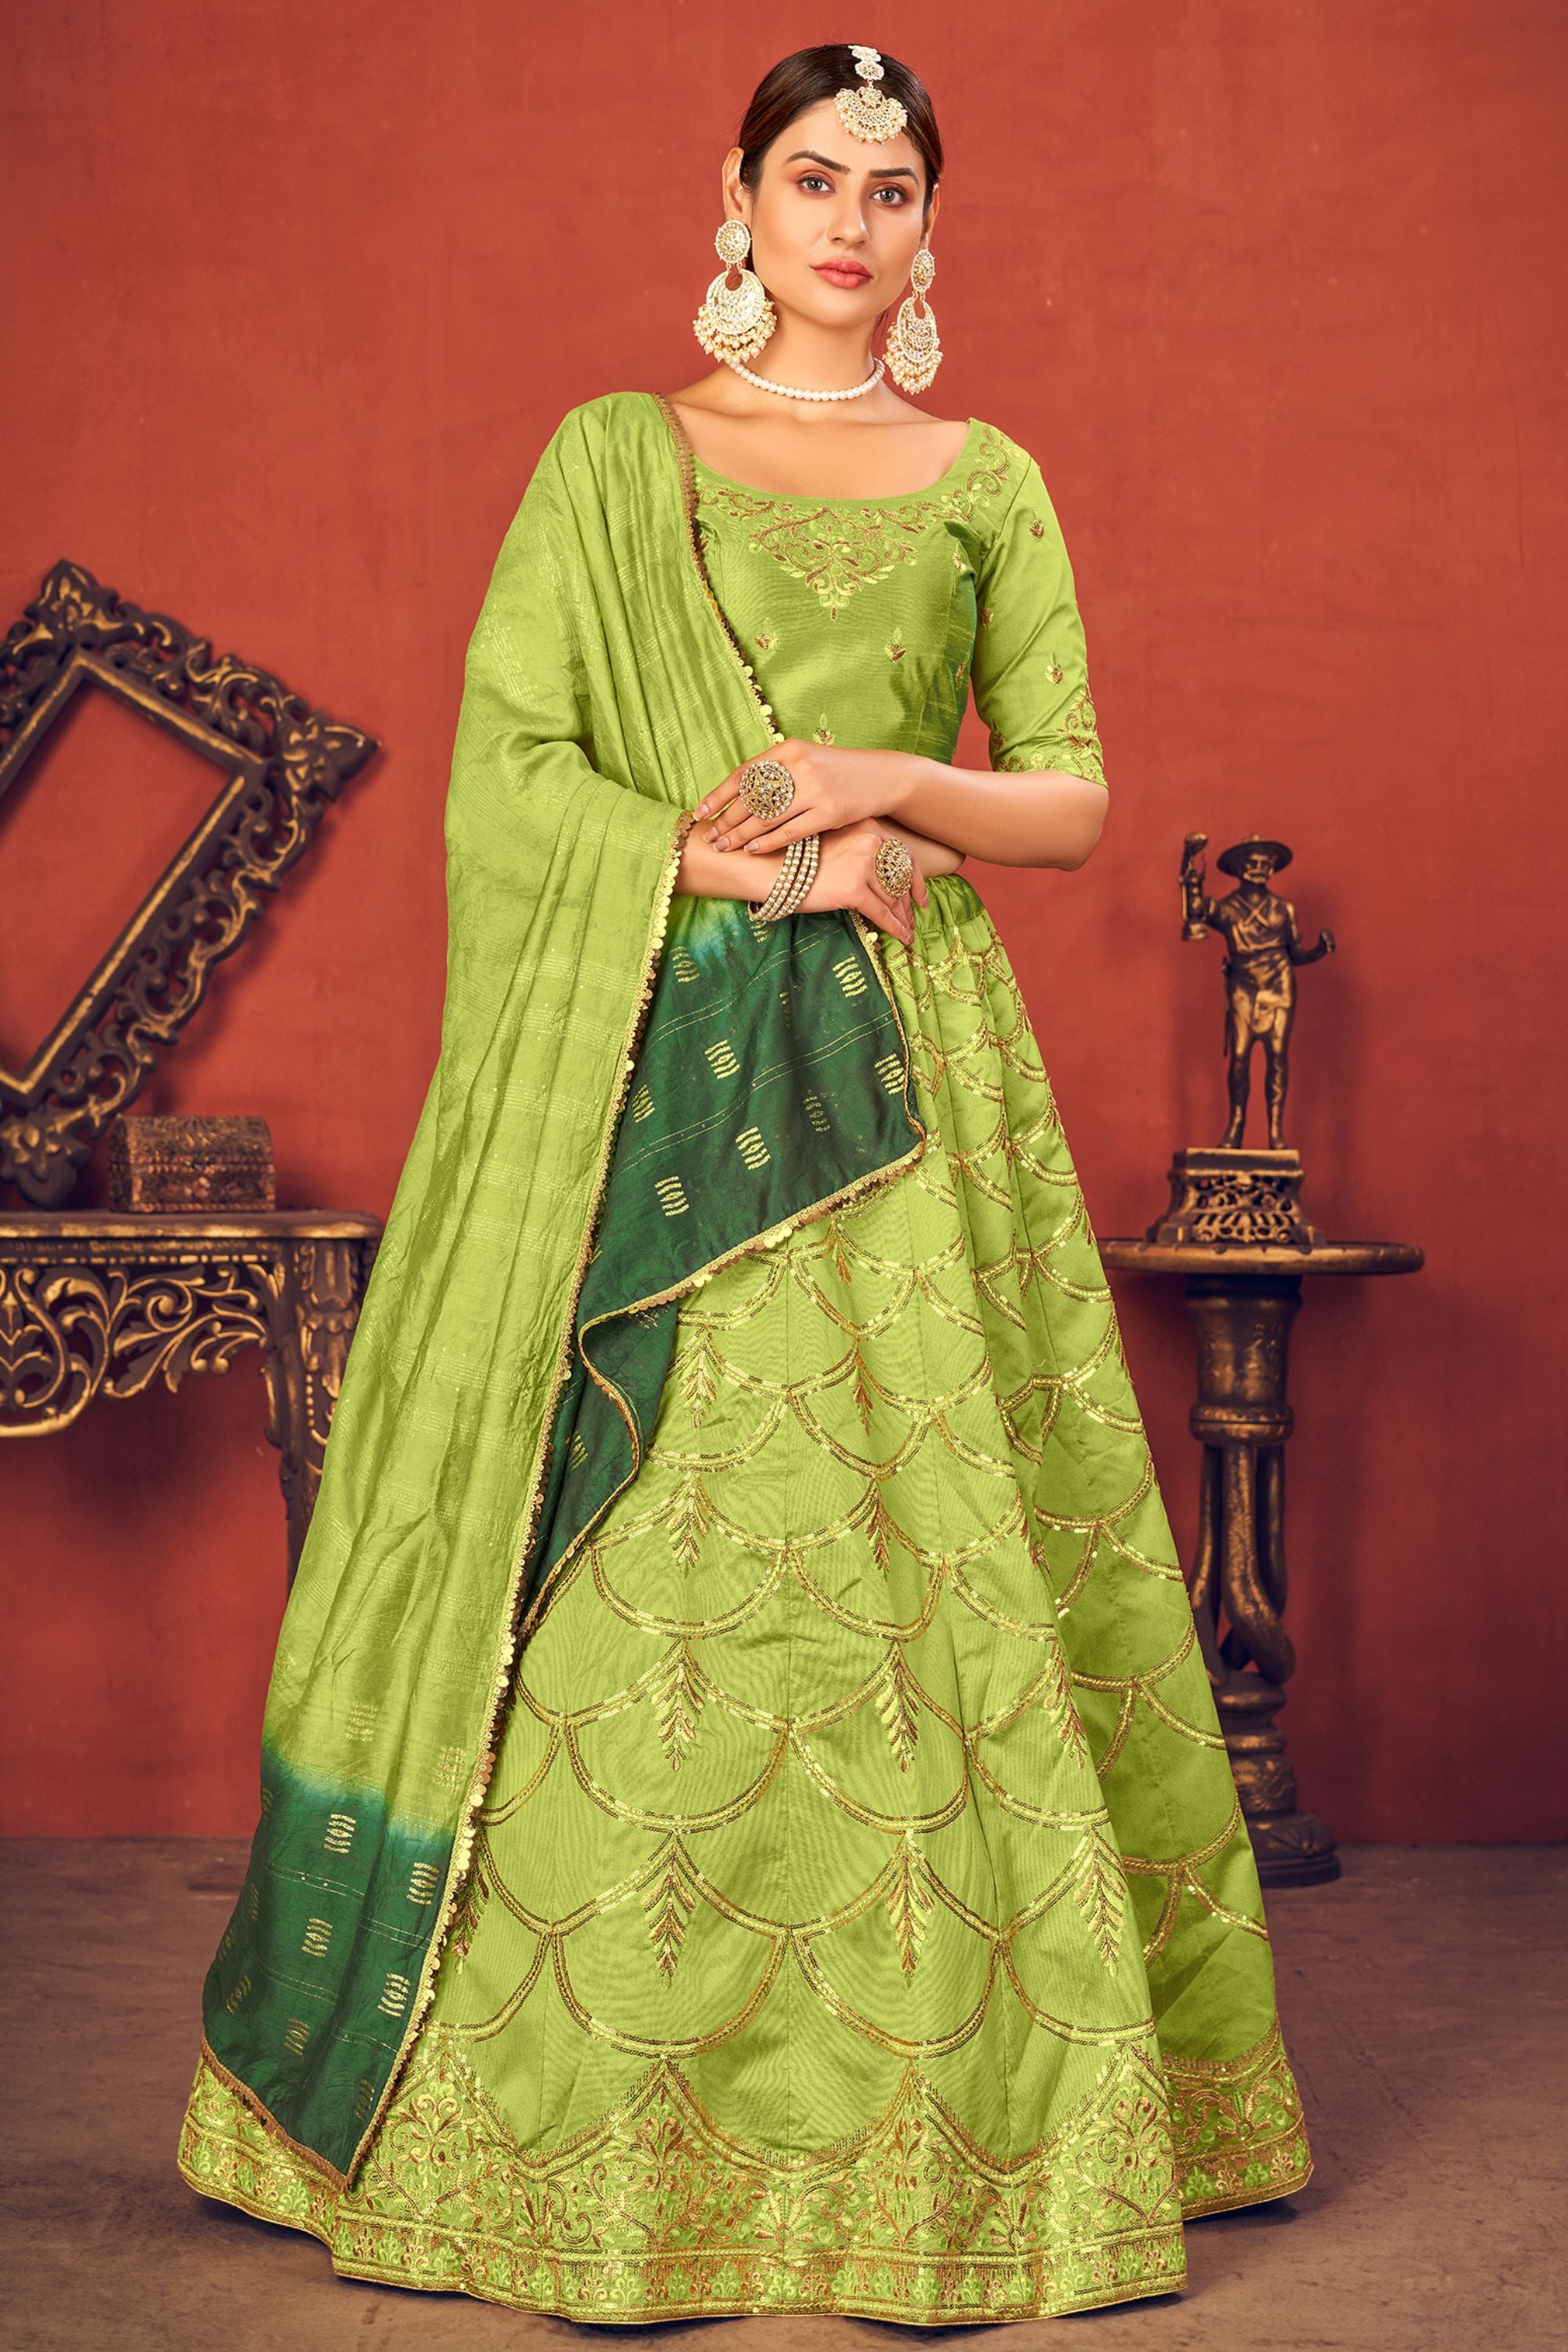 Parrot-green embroidered organza stitched lehenga - Flaher - 3898192